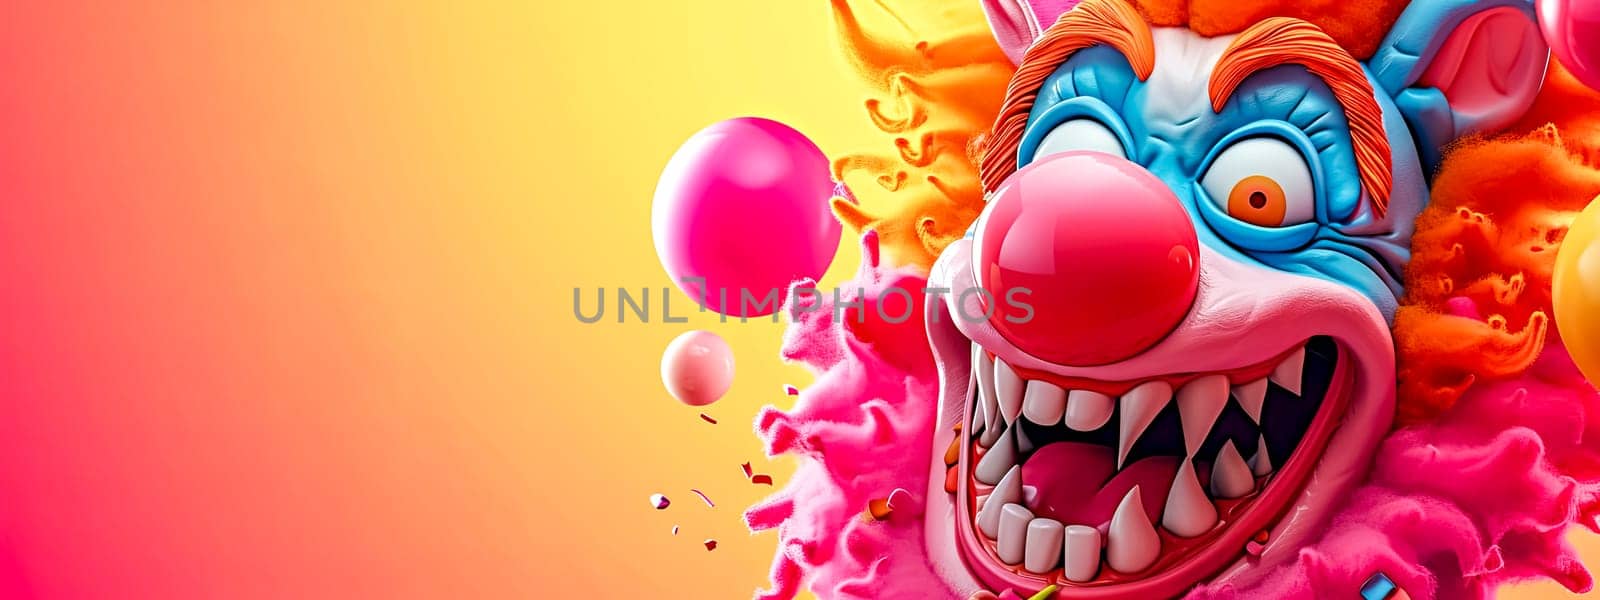 clown-like character with exaggerated facial features, set against a gradient orange and yellow background. copy space